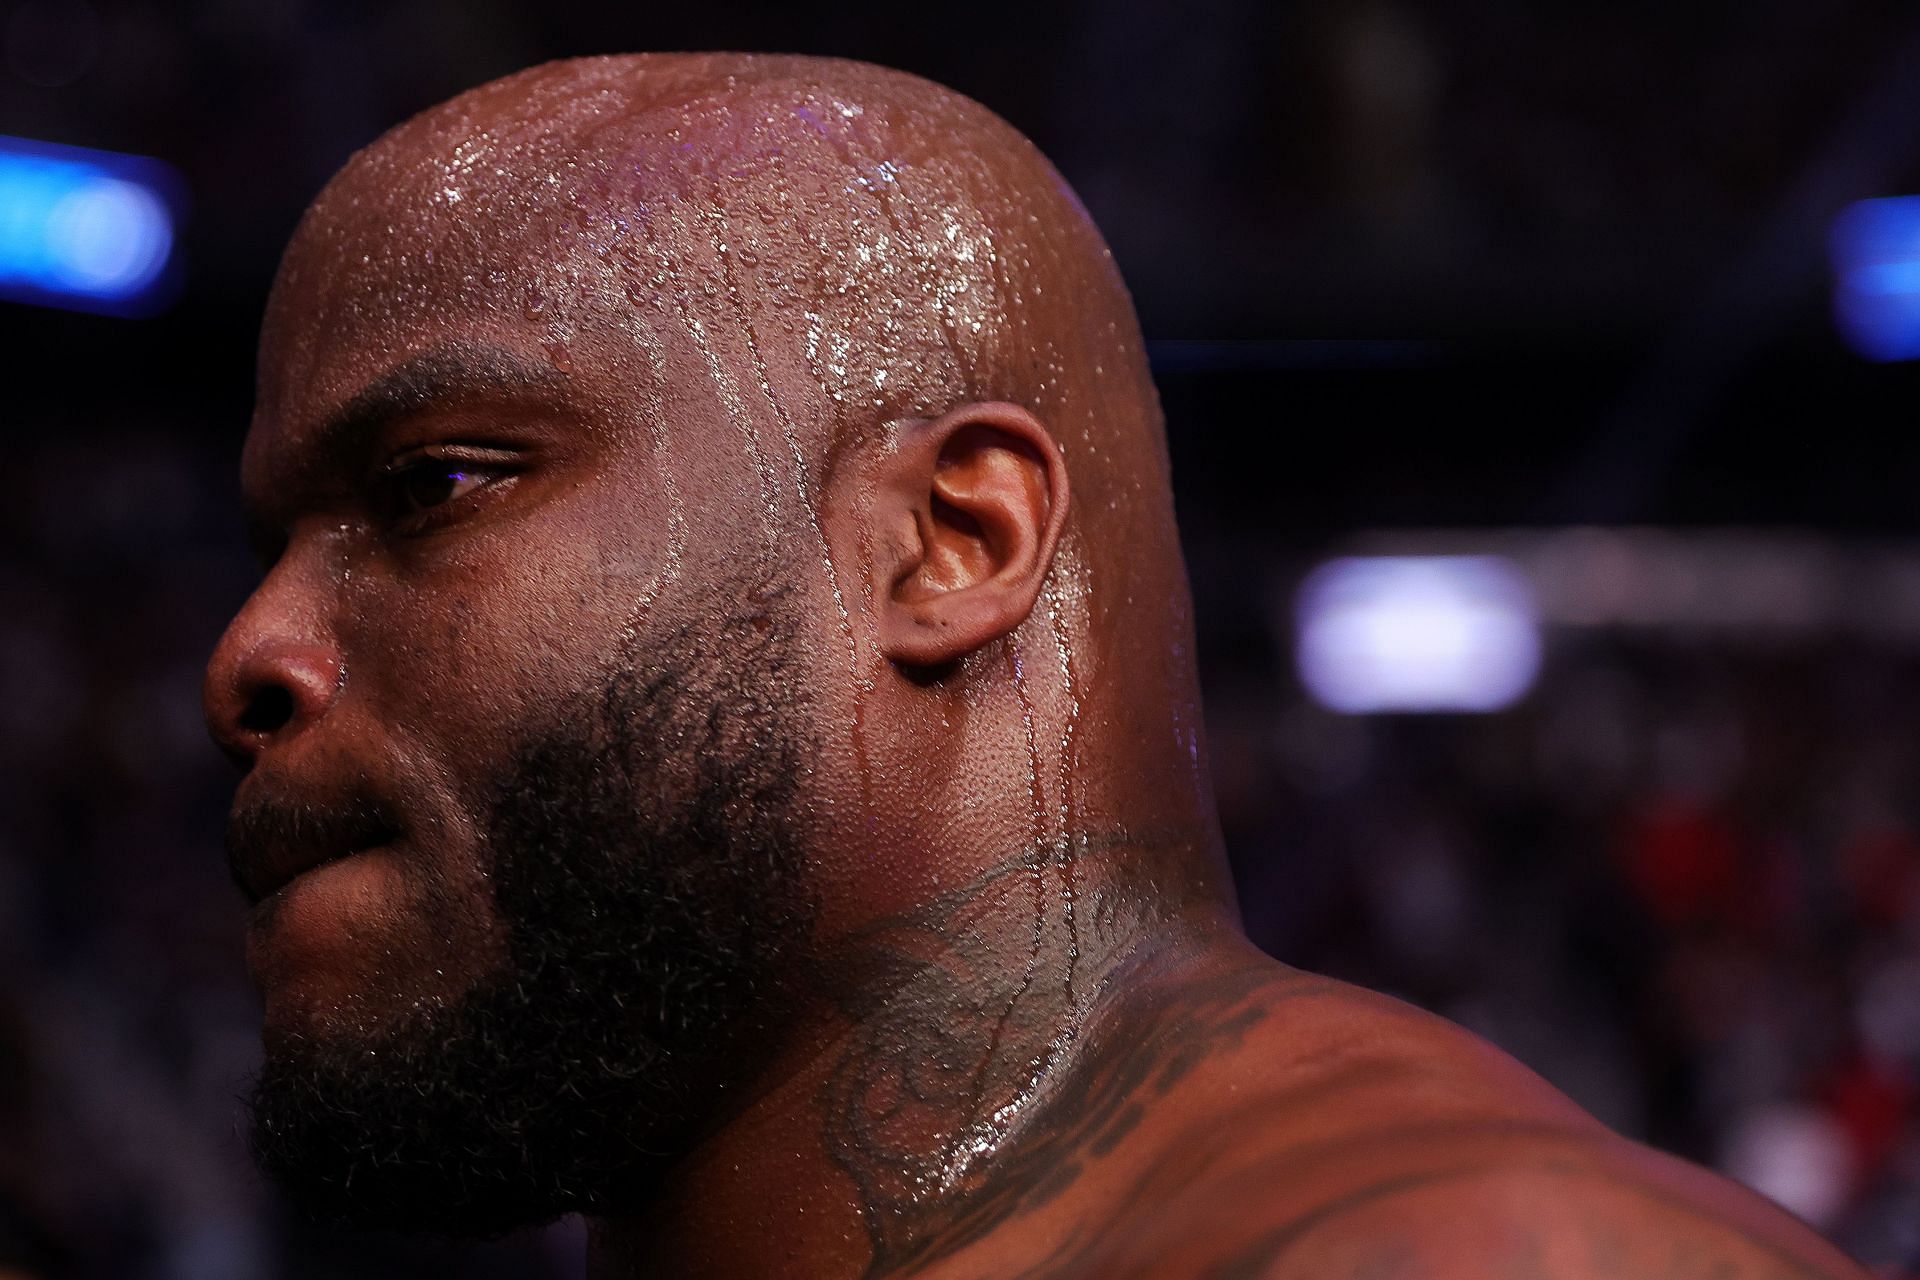 Derrick Lewis is 17-7 in the UFC heavyweight division